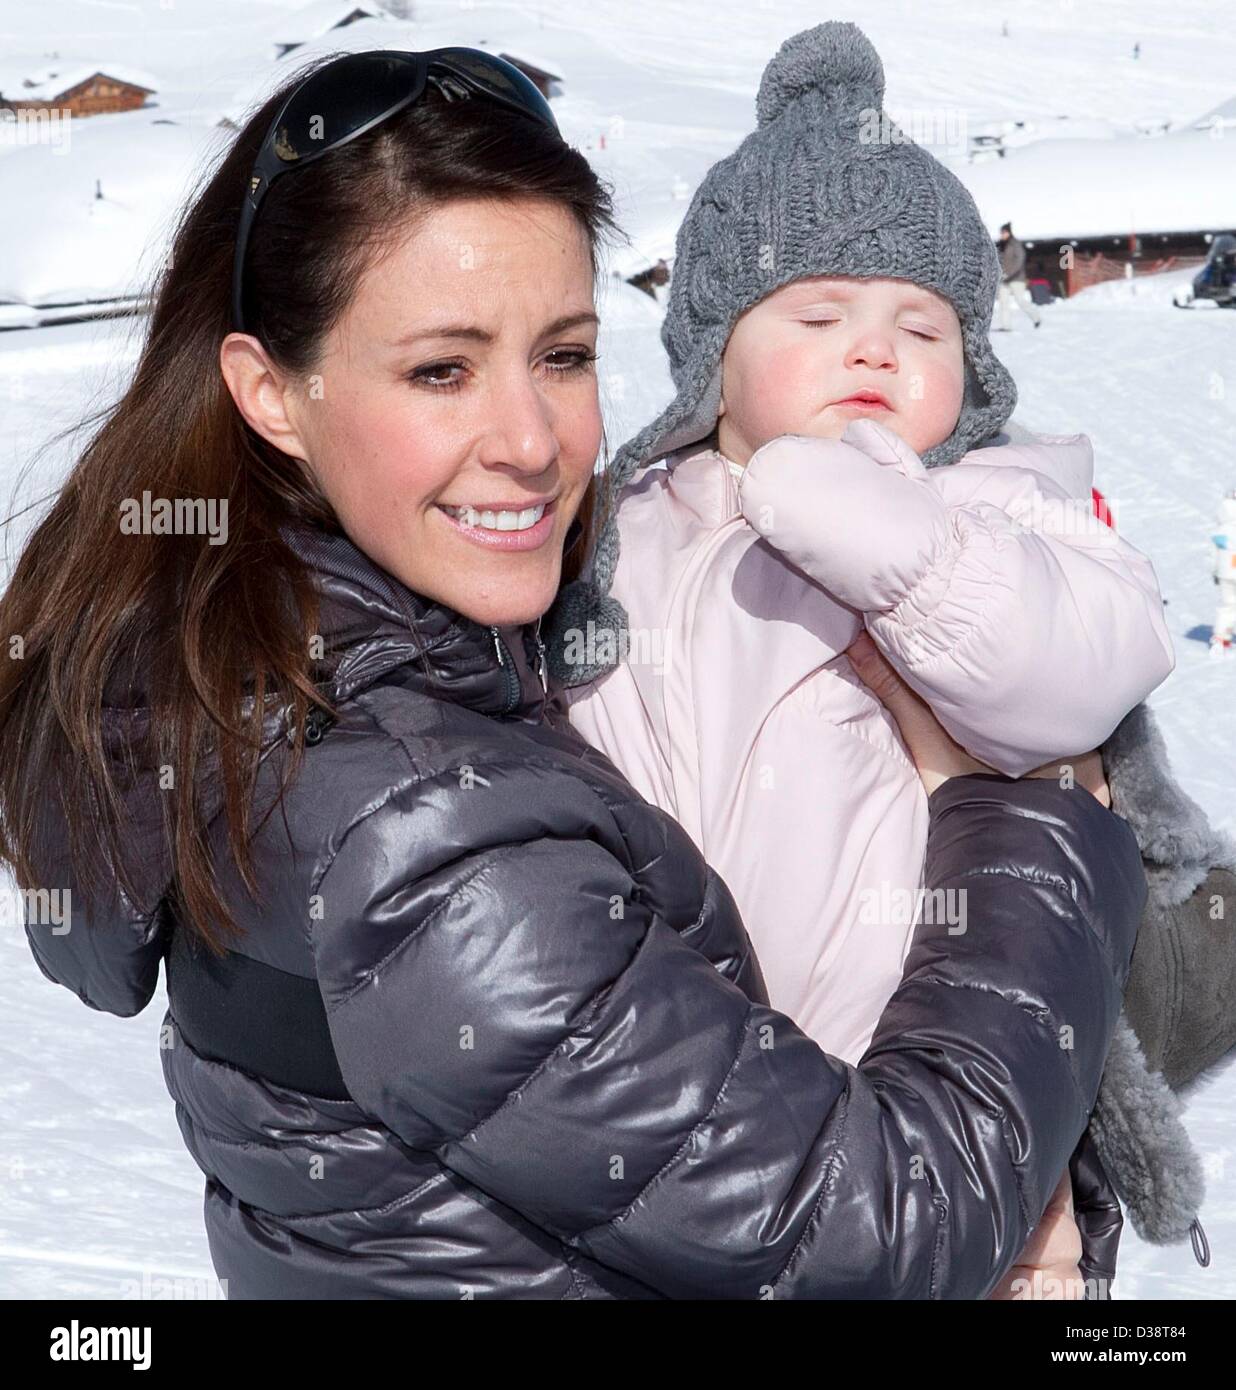 Princess Marie of Denmark pose Princess Athena, for the media at Col-de-Bretaye in Villars, 13 February 2013. The family is on a winter holiday in Switzerland. Photo: Albert Nieboer /RPE/NETHERLANDS OUT Stock Photo